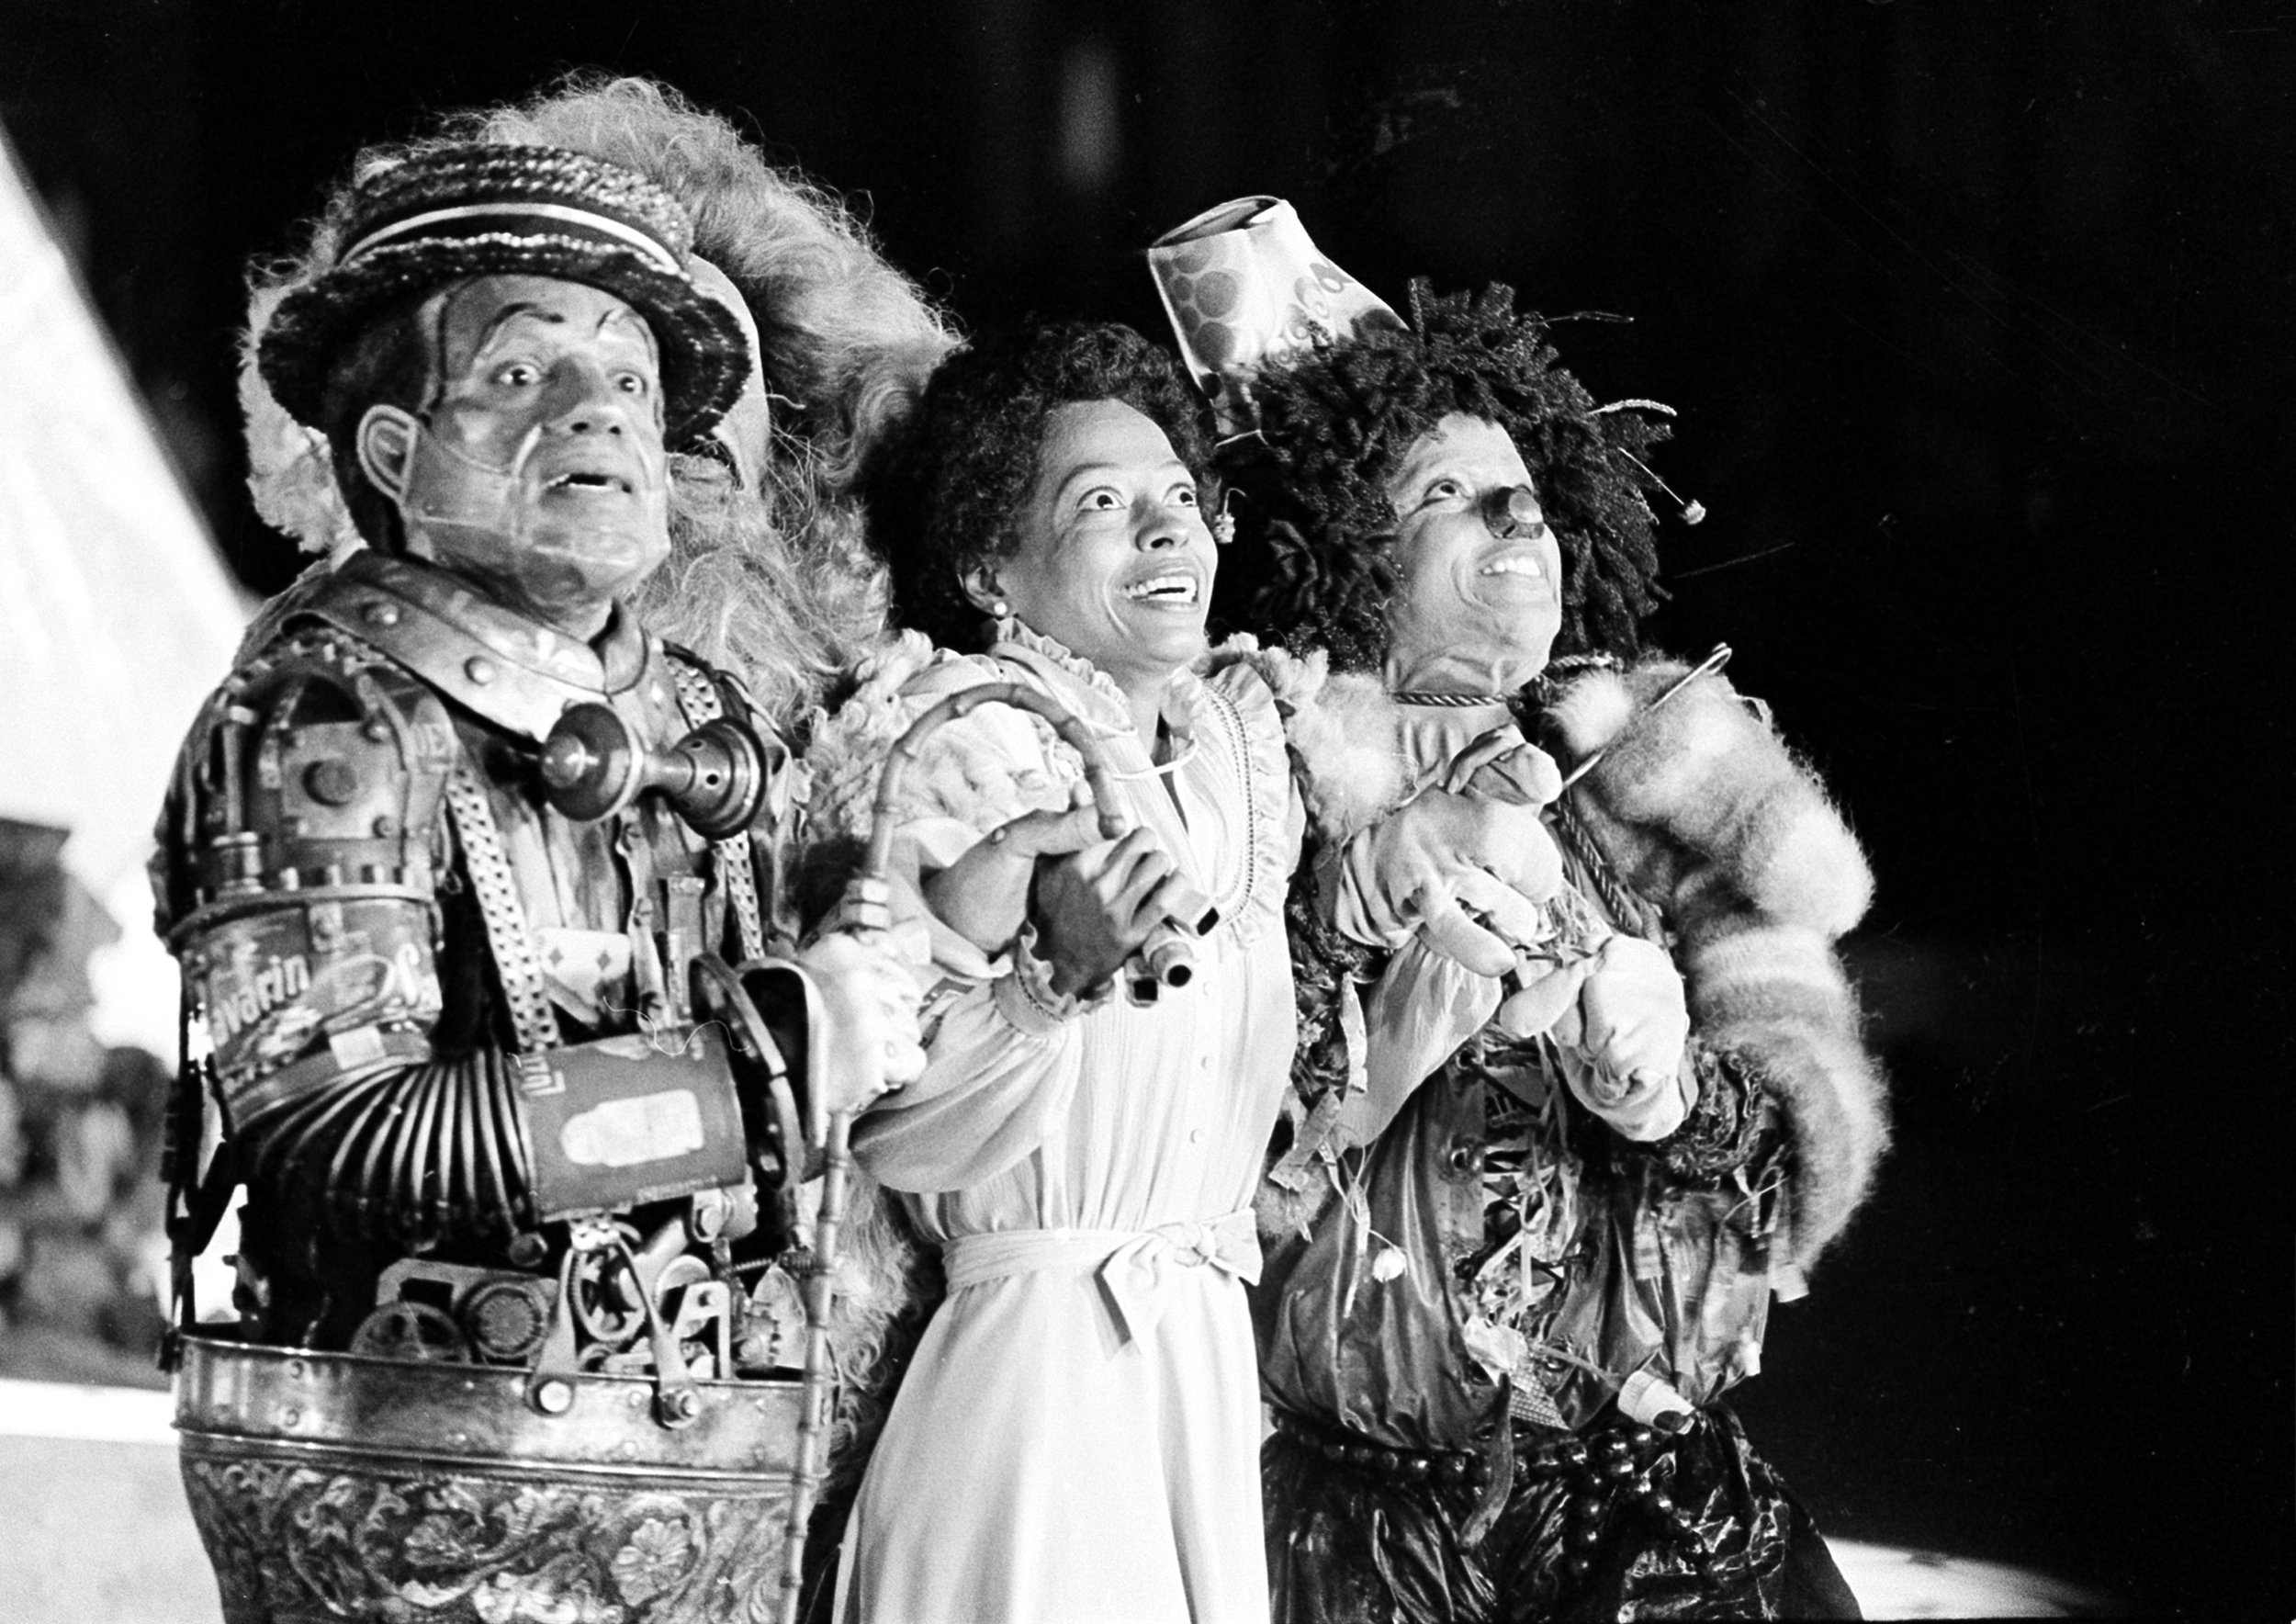  Diana Ross, center, as Dorothy, Michael Jackson, right, as Scarecrow, and Nipsey Russell as Tinman perform during filming of the musical "The Wiz" in New York's World Trade Center, Tuesday, Oct. 4, 1977.  Ted Ross, portraying the Lion, is partly hid